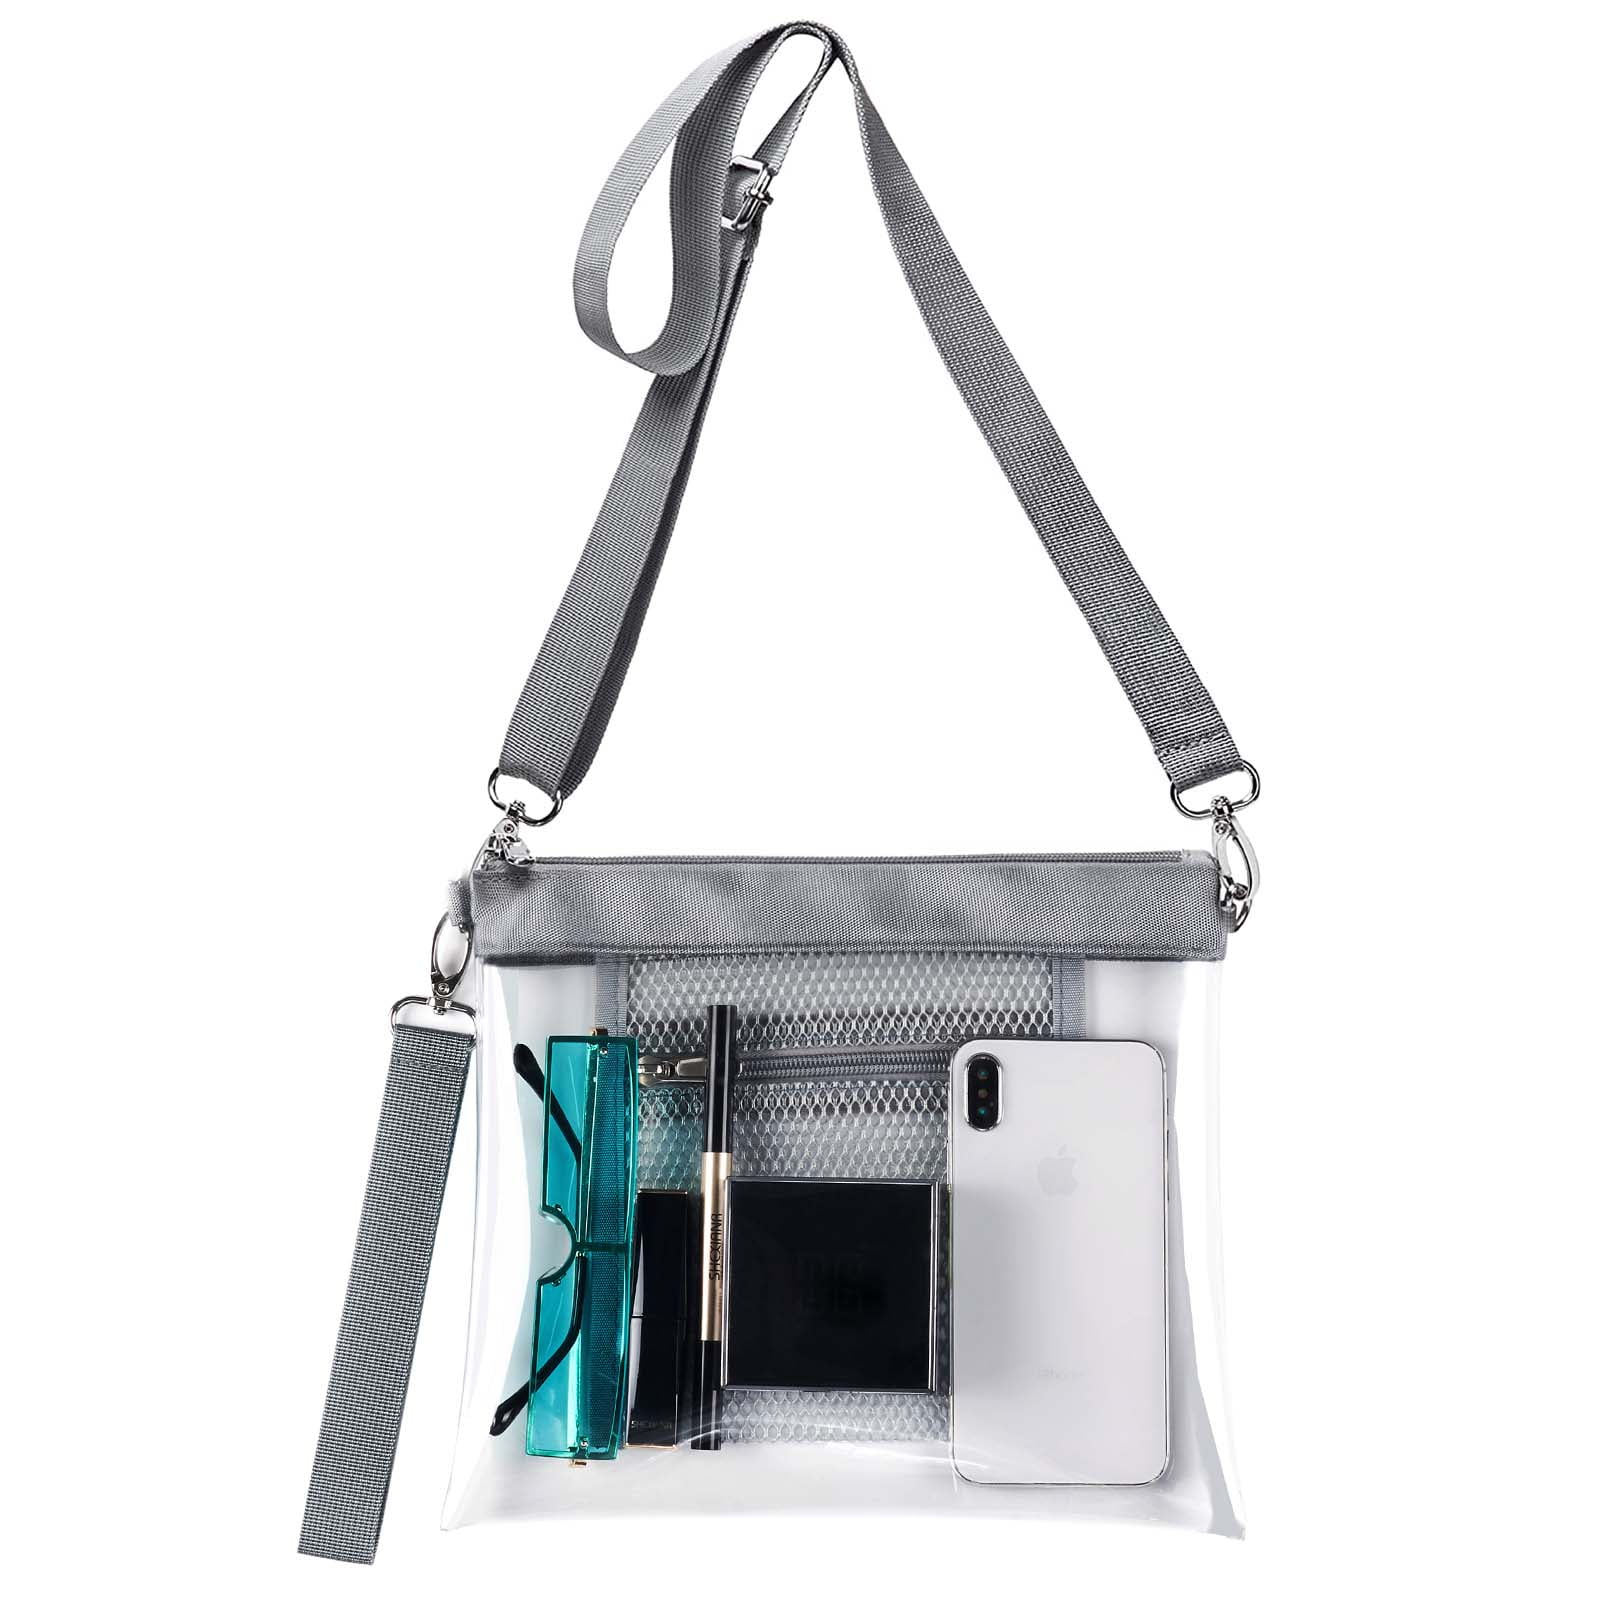 Pro LV Crossbody Clear Bag, Stadium Approved Bag – The Emerald Fox Boutique